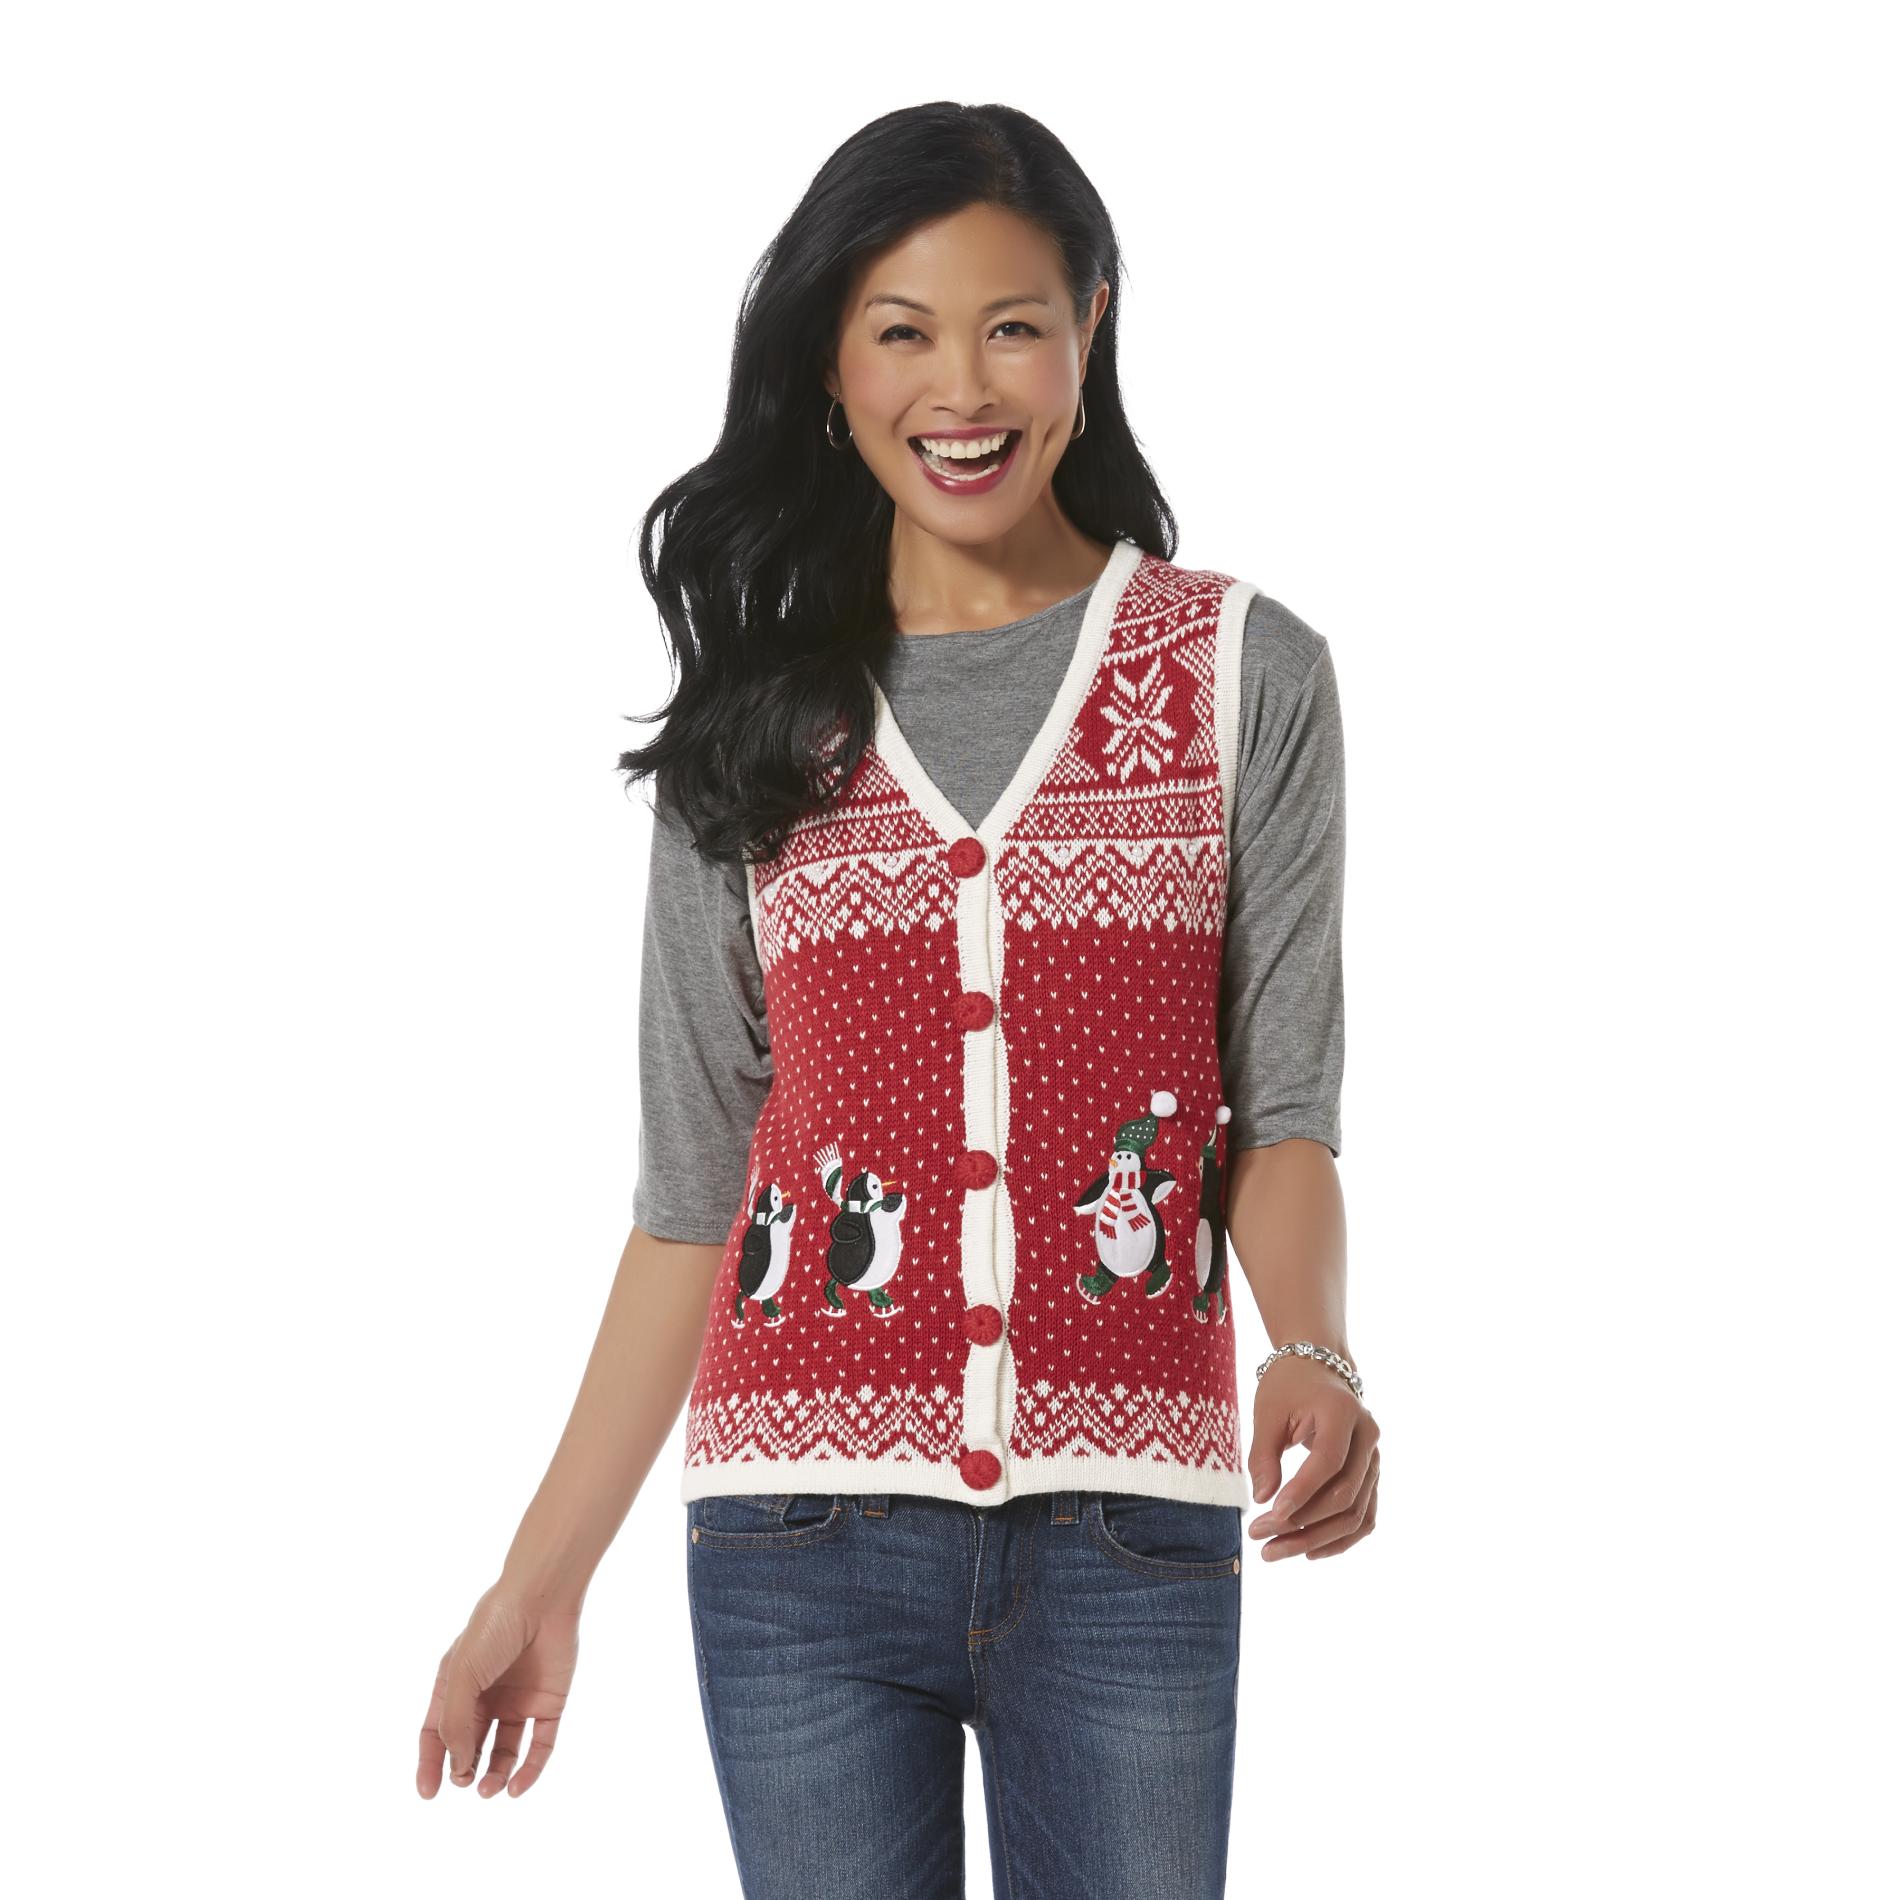 Holiday Editions Women's Christmas Sweater Vest - Penguins